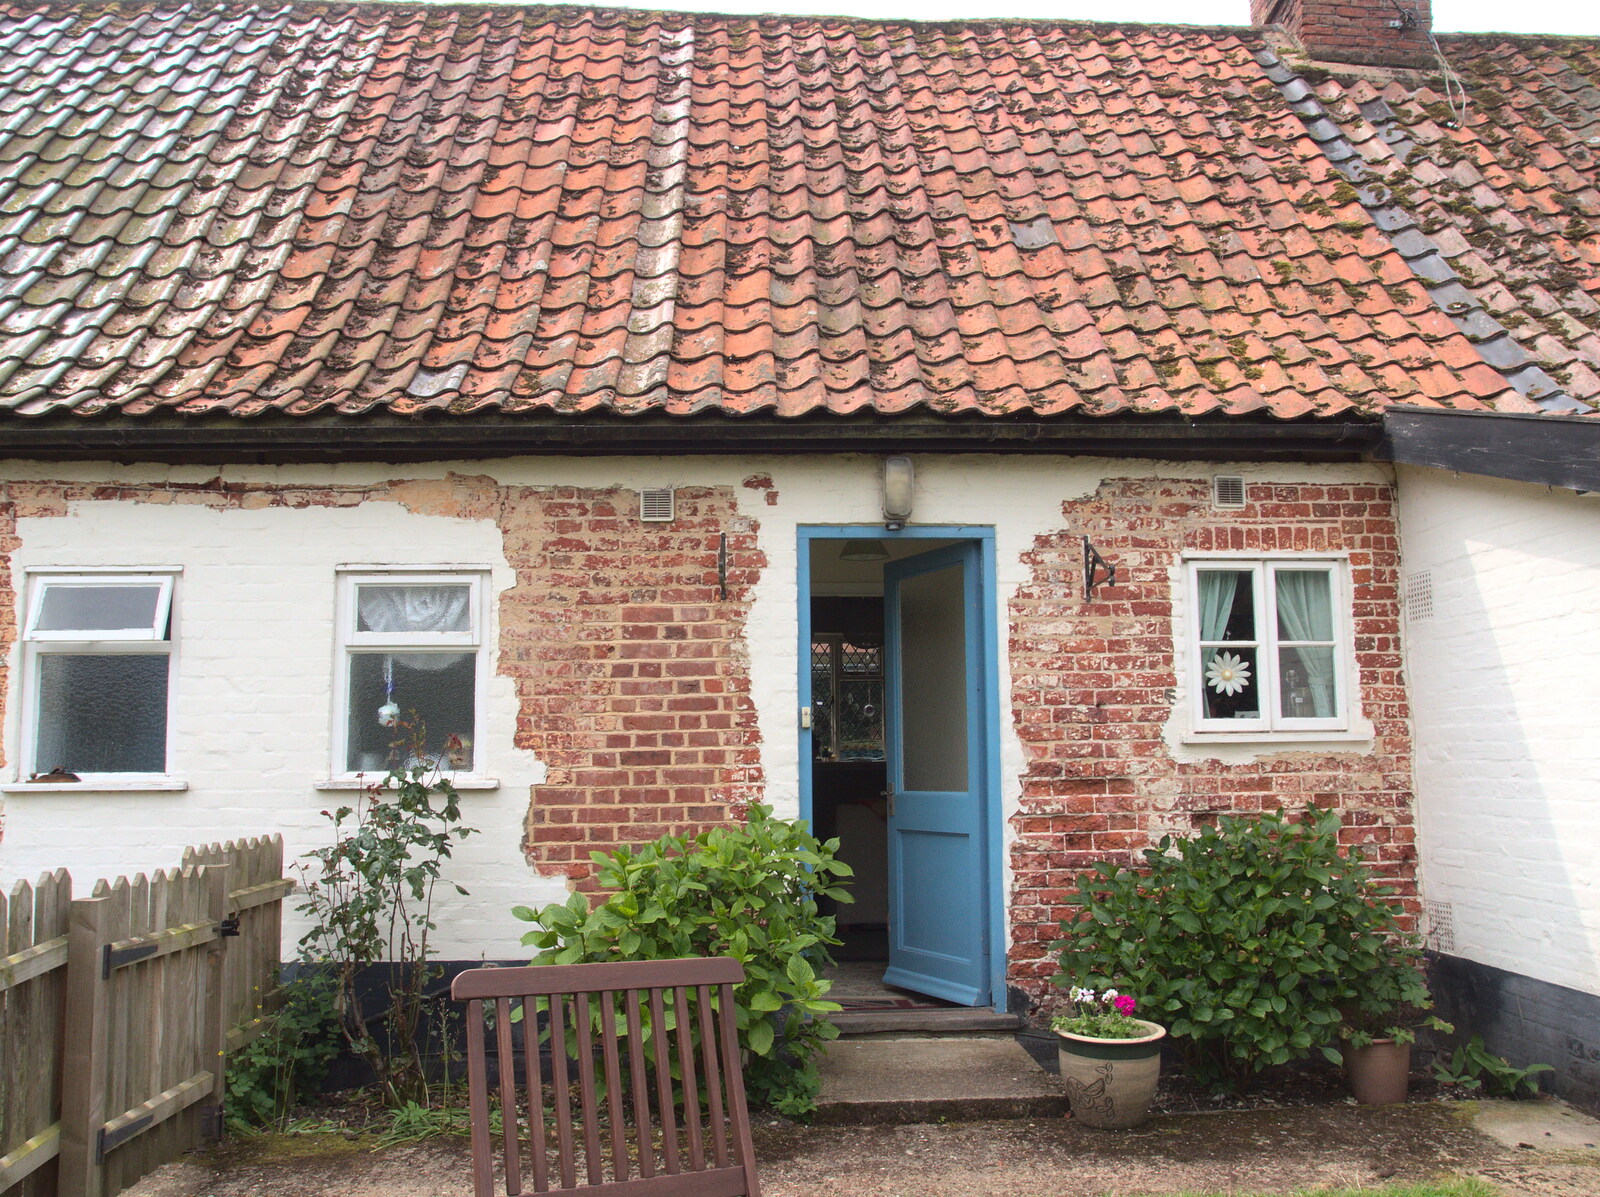 Alfie Elliot's old house in Brome from The BBs at Fersfield, Norfolk - 11th June 2016